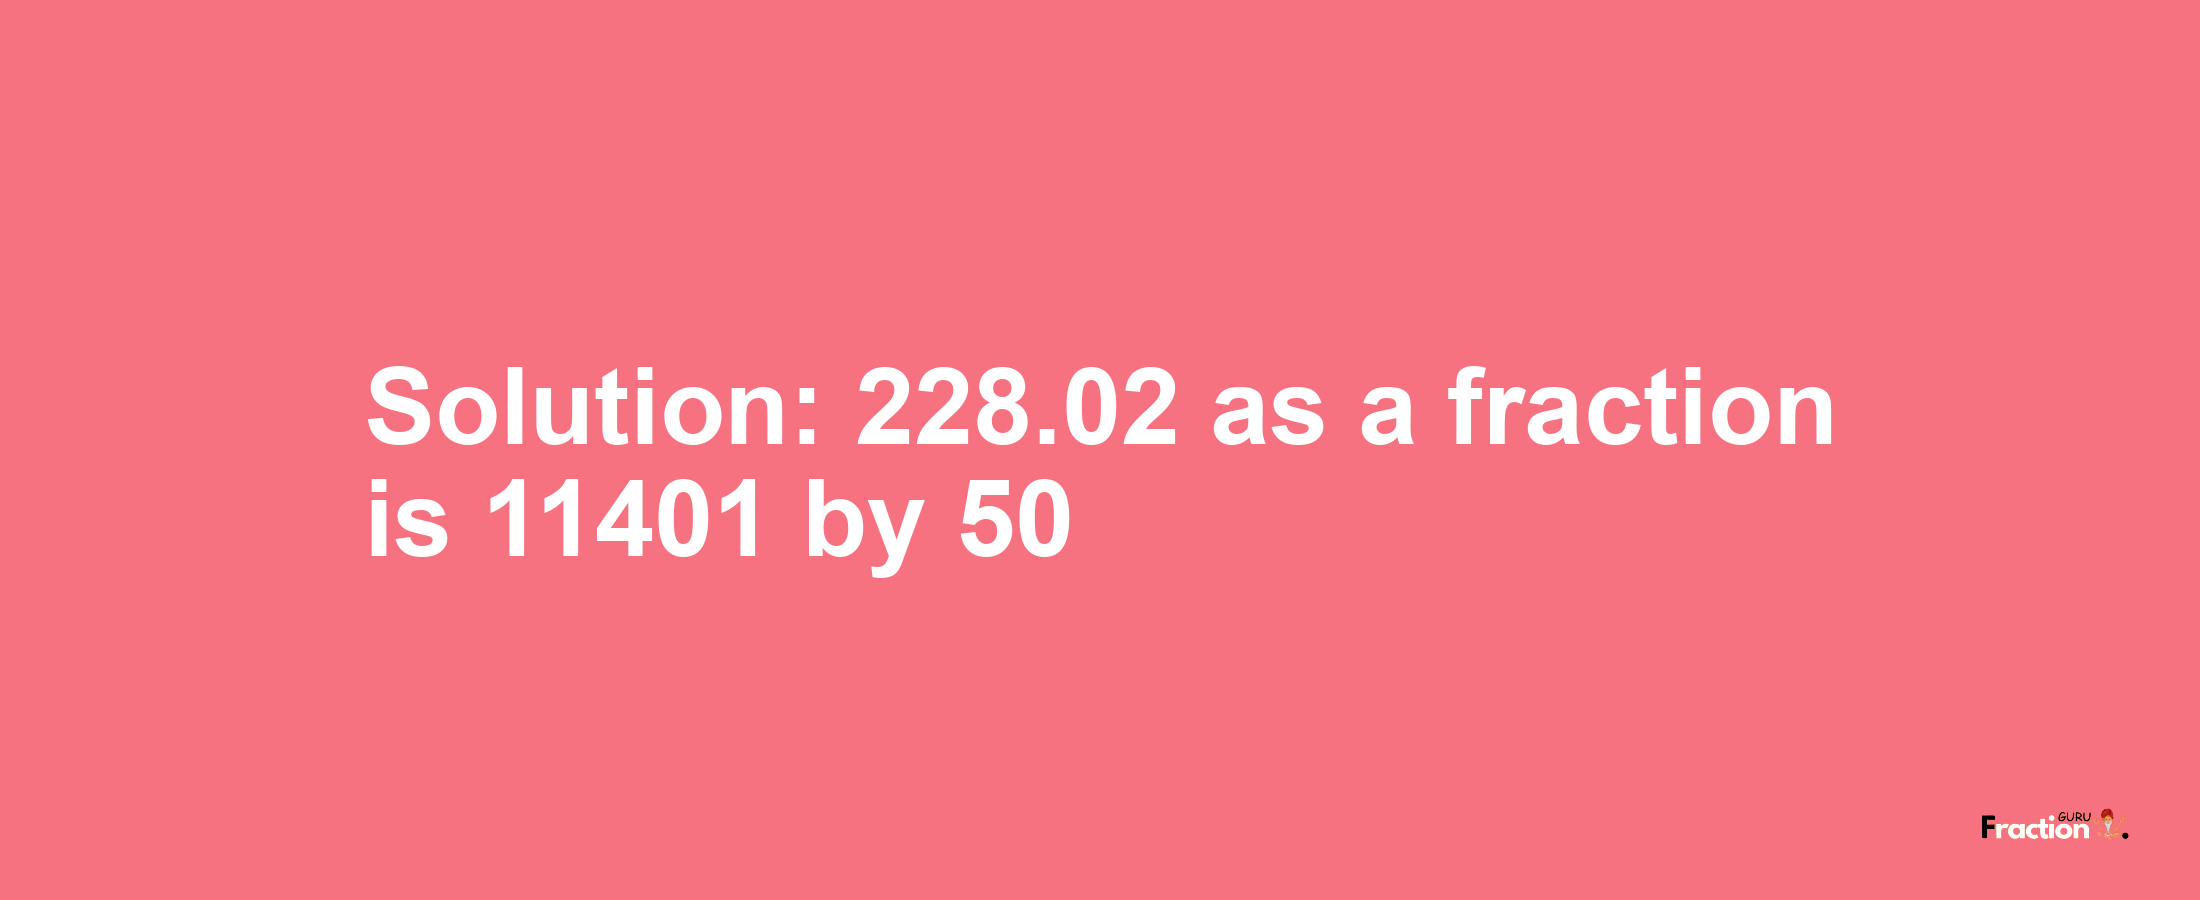 Solution:228.02 as a fraction is 11401/50